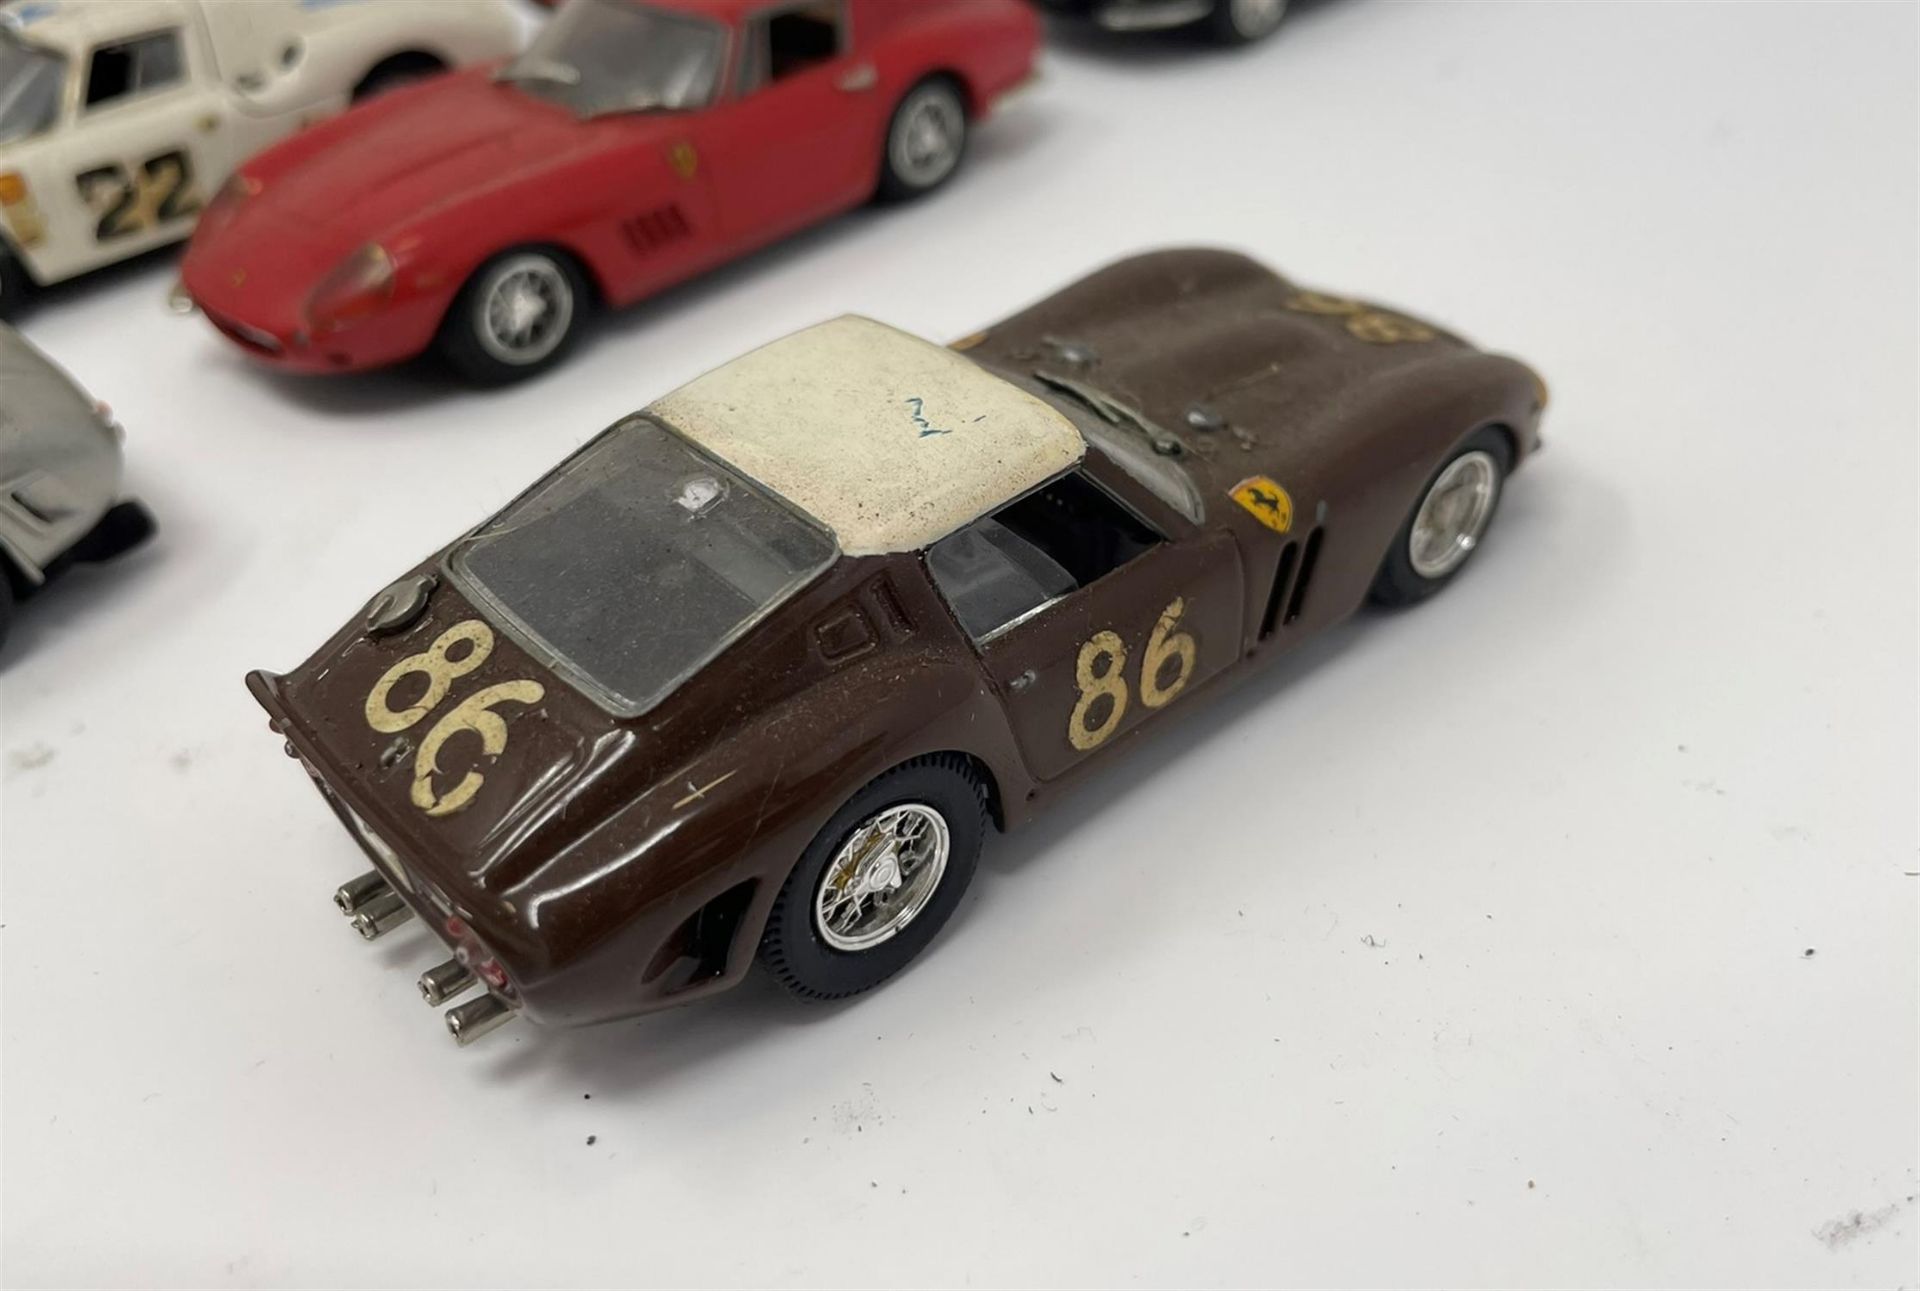 A Dozen 1/43rd Scale Classic Model Cars From the 1950s, 60s and 70s - Image 6 of 10